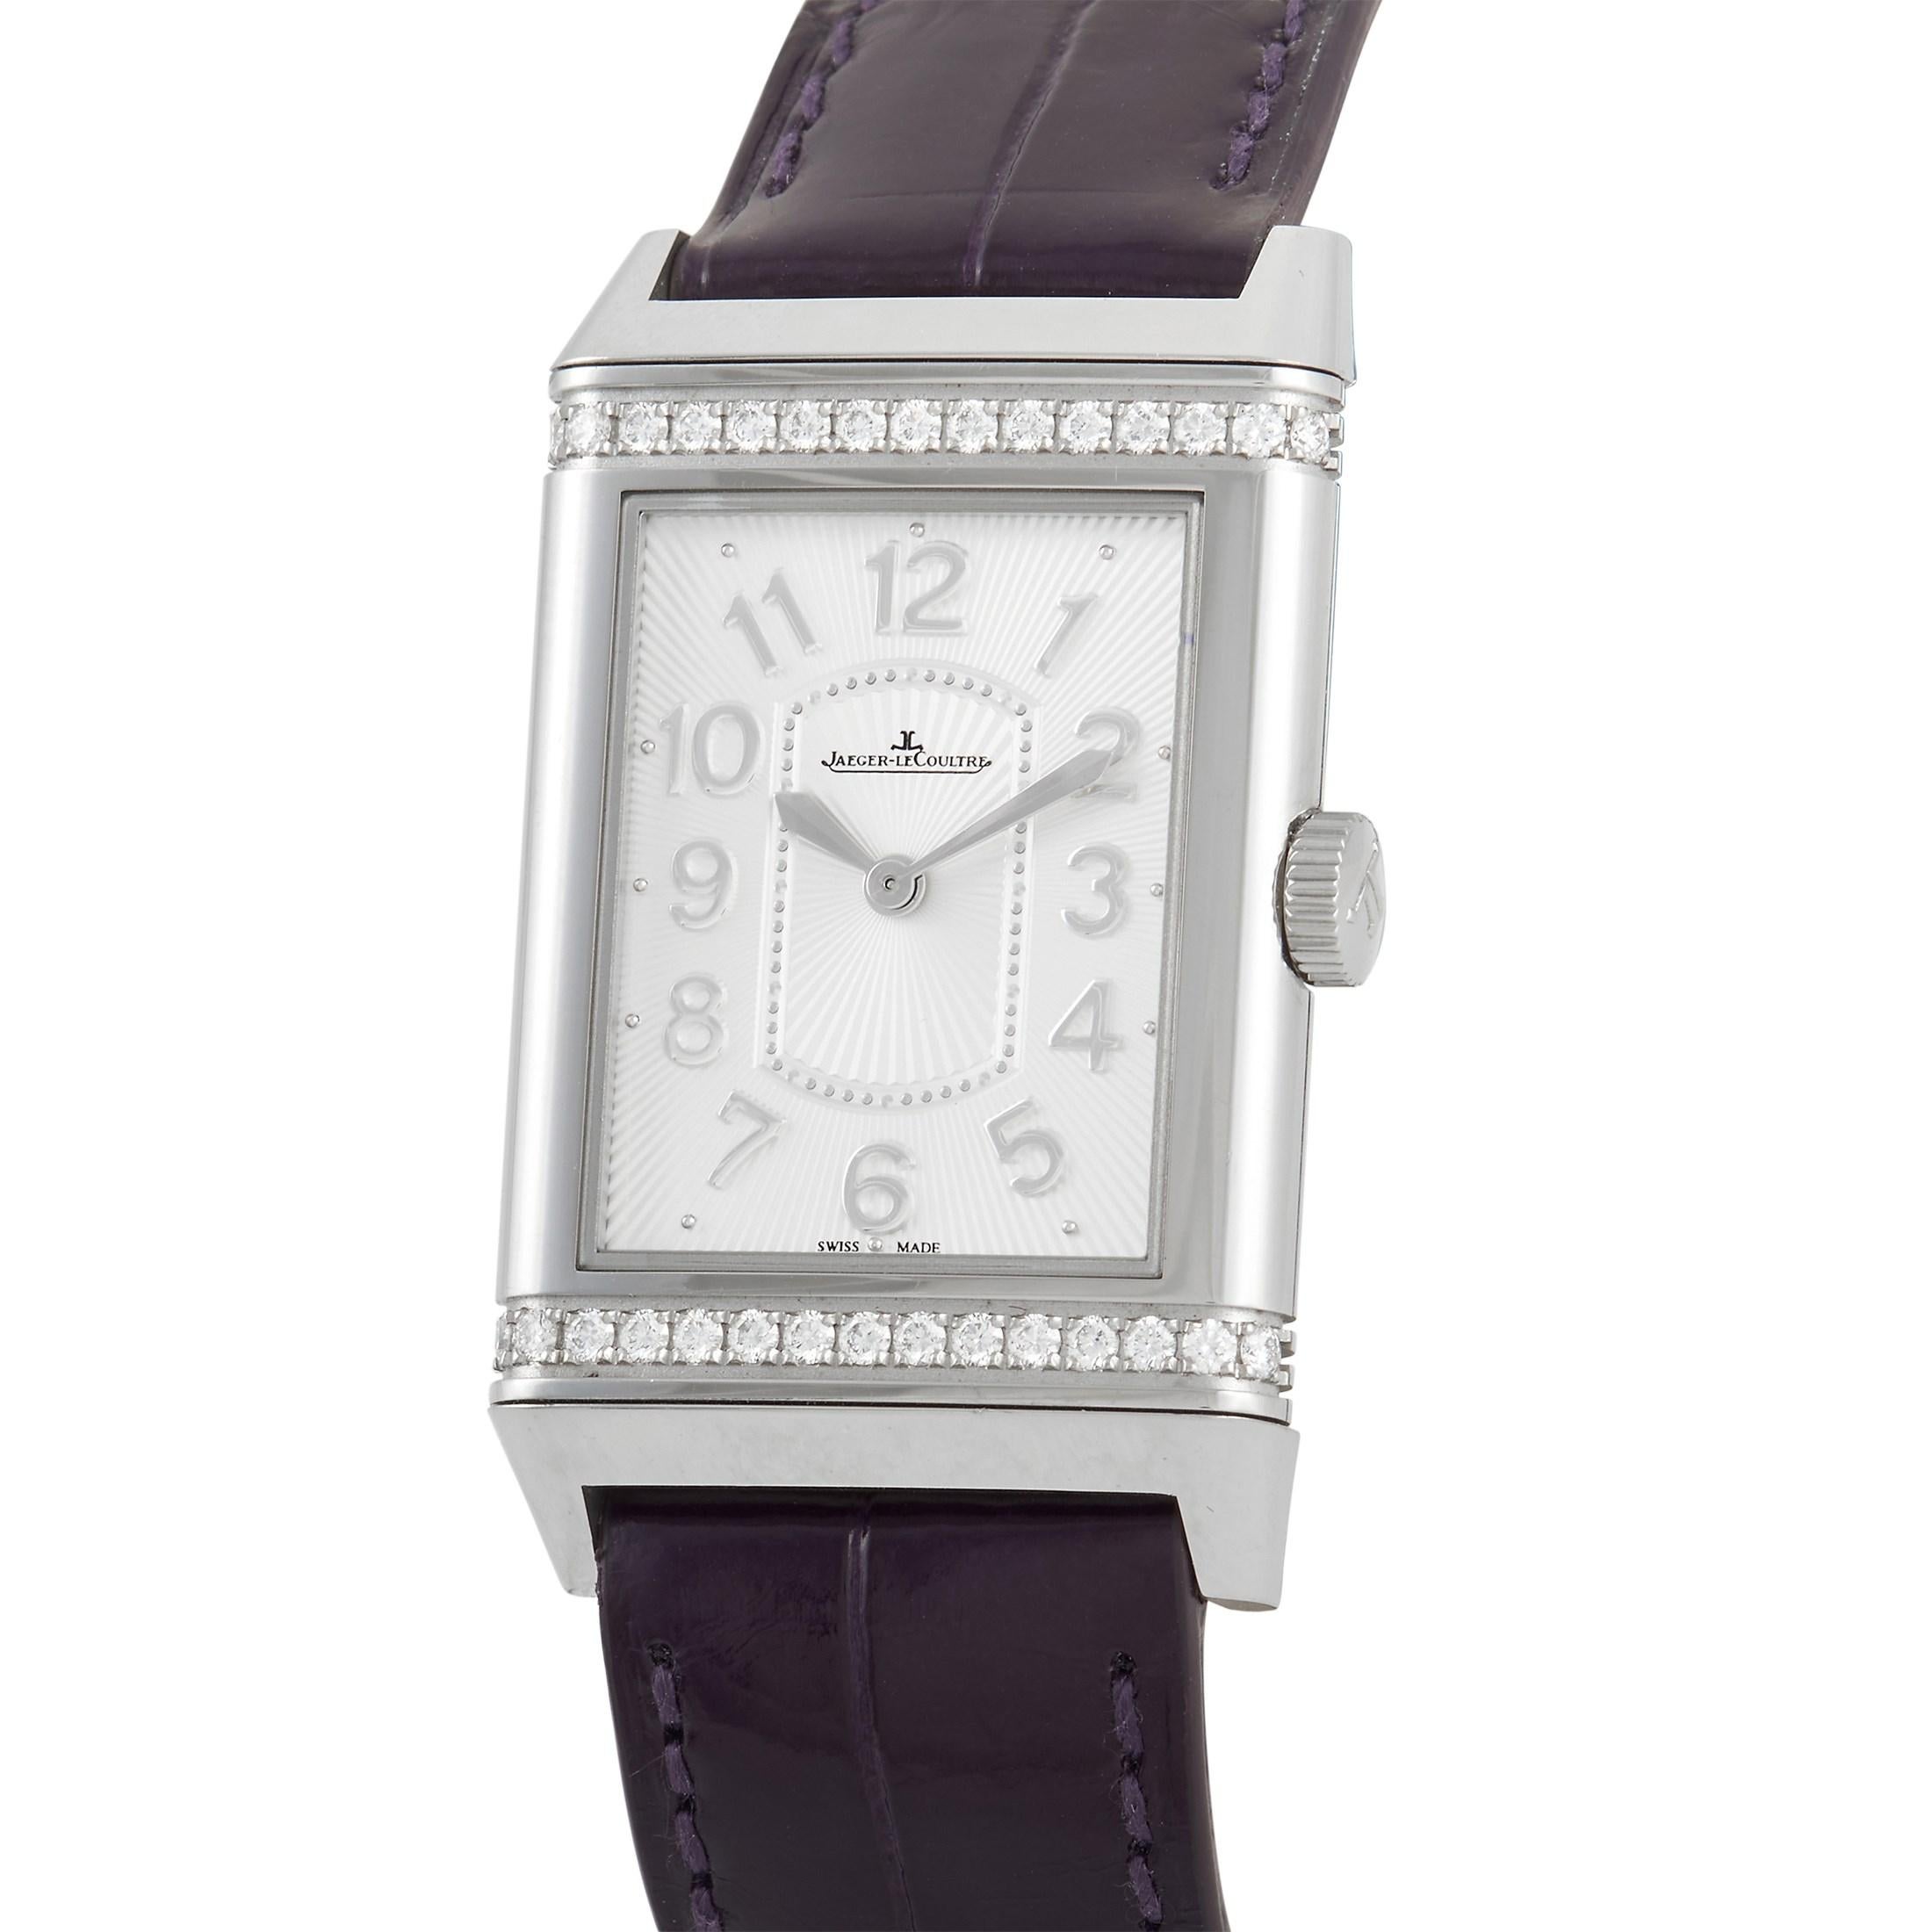 The Jaeger LeColtre Reverso Ultra Thin Diamond Watch, reference number 268.8.86, is an opulent piece that makes a subtle statement.

This watch’s striking rectangular 39mm case and bezel are crafted from shimmering stainless steel, which provides